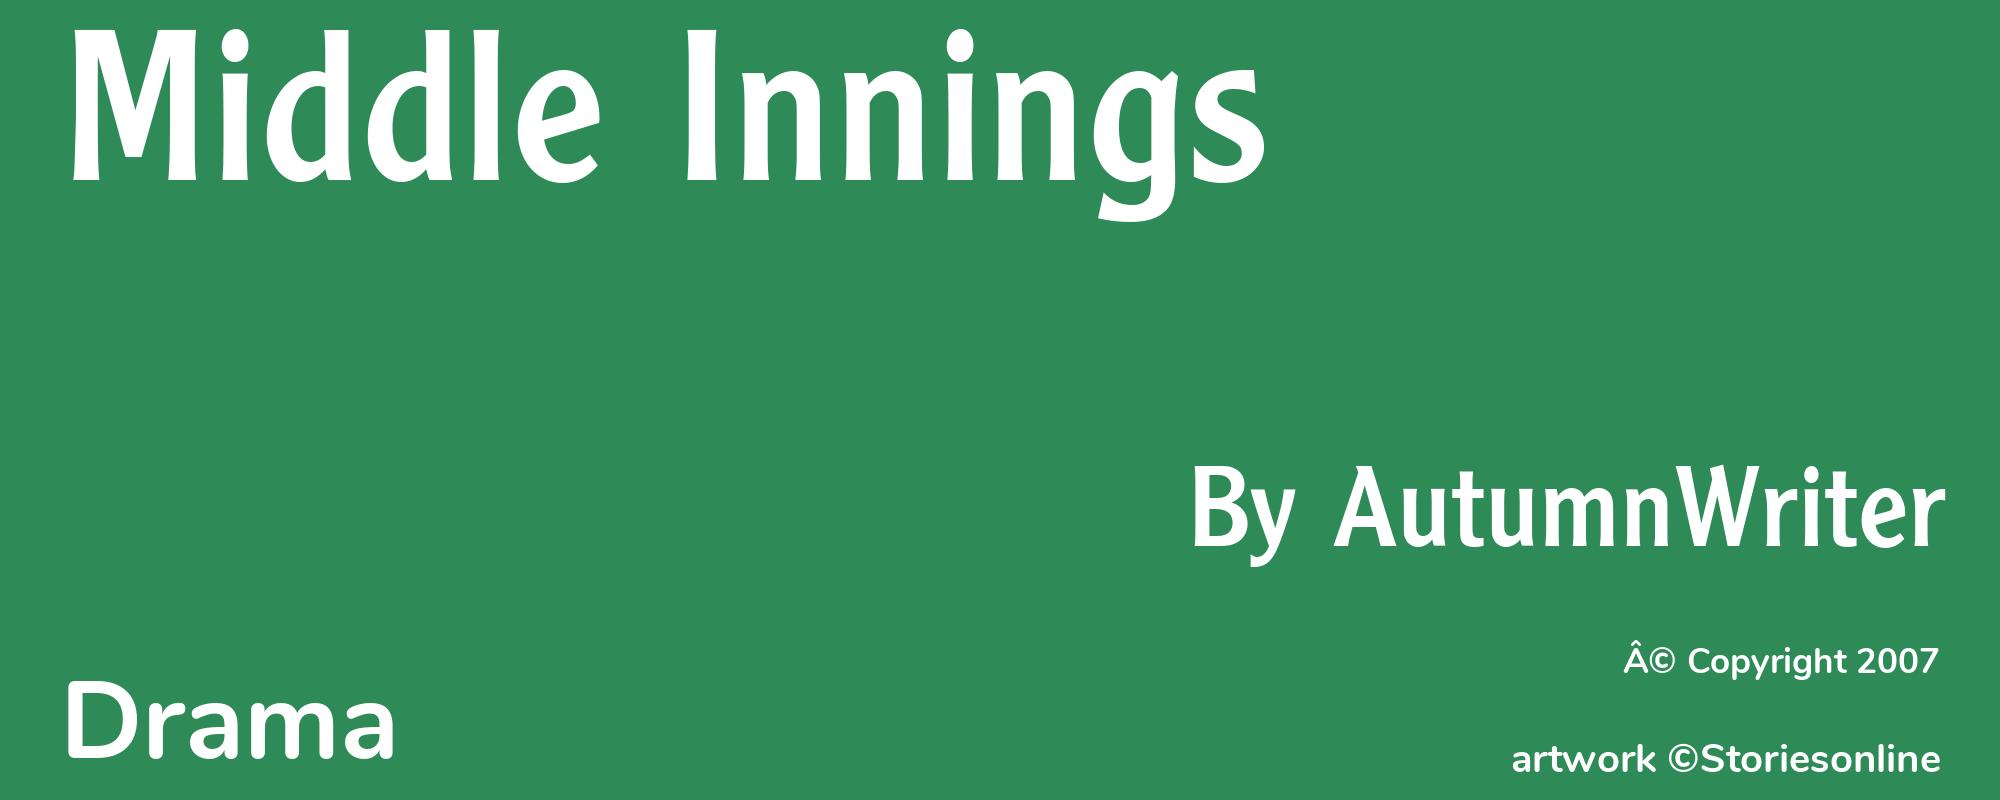 Middle Innings - Cover